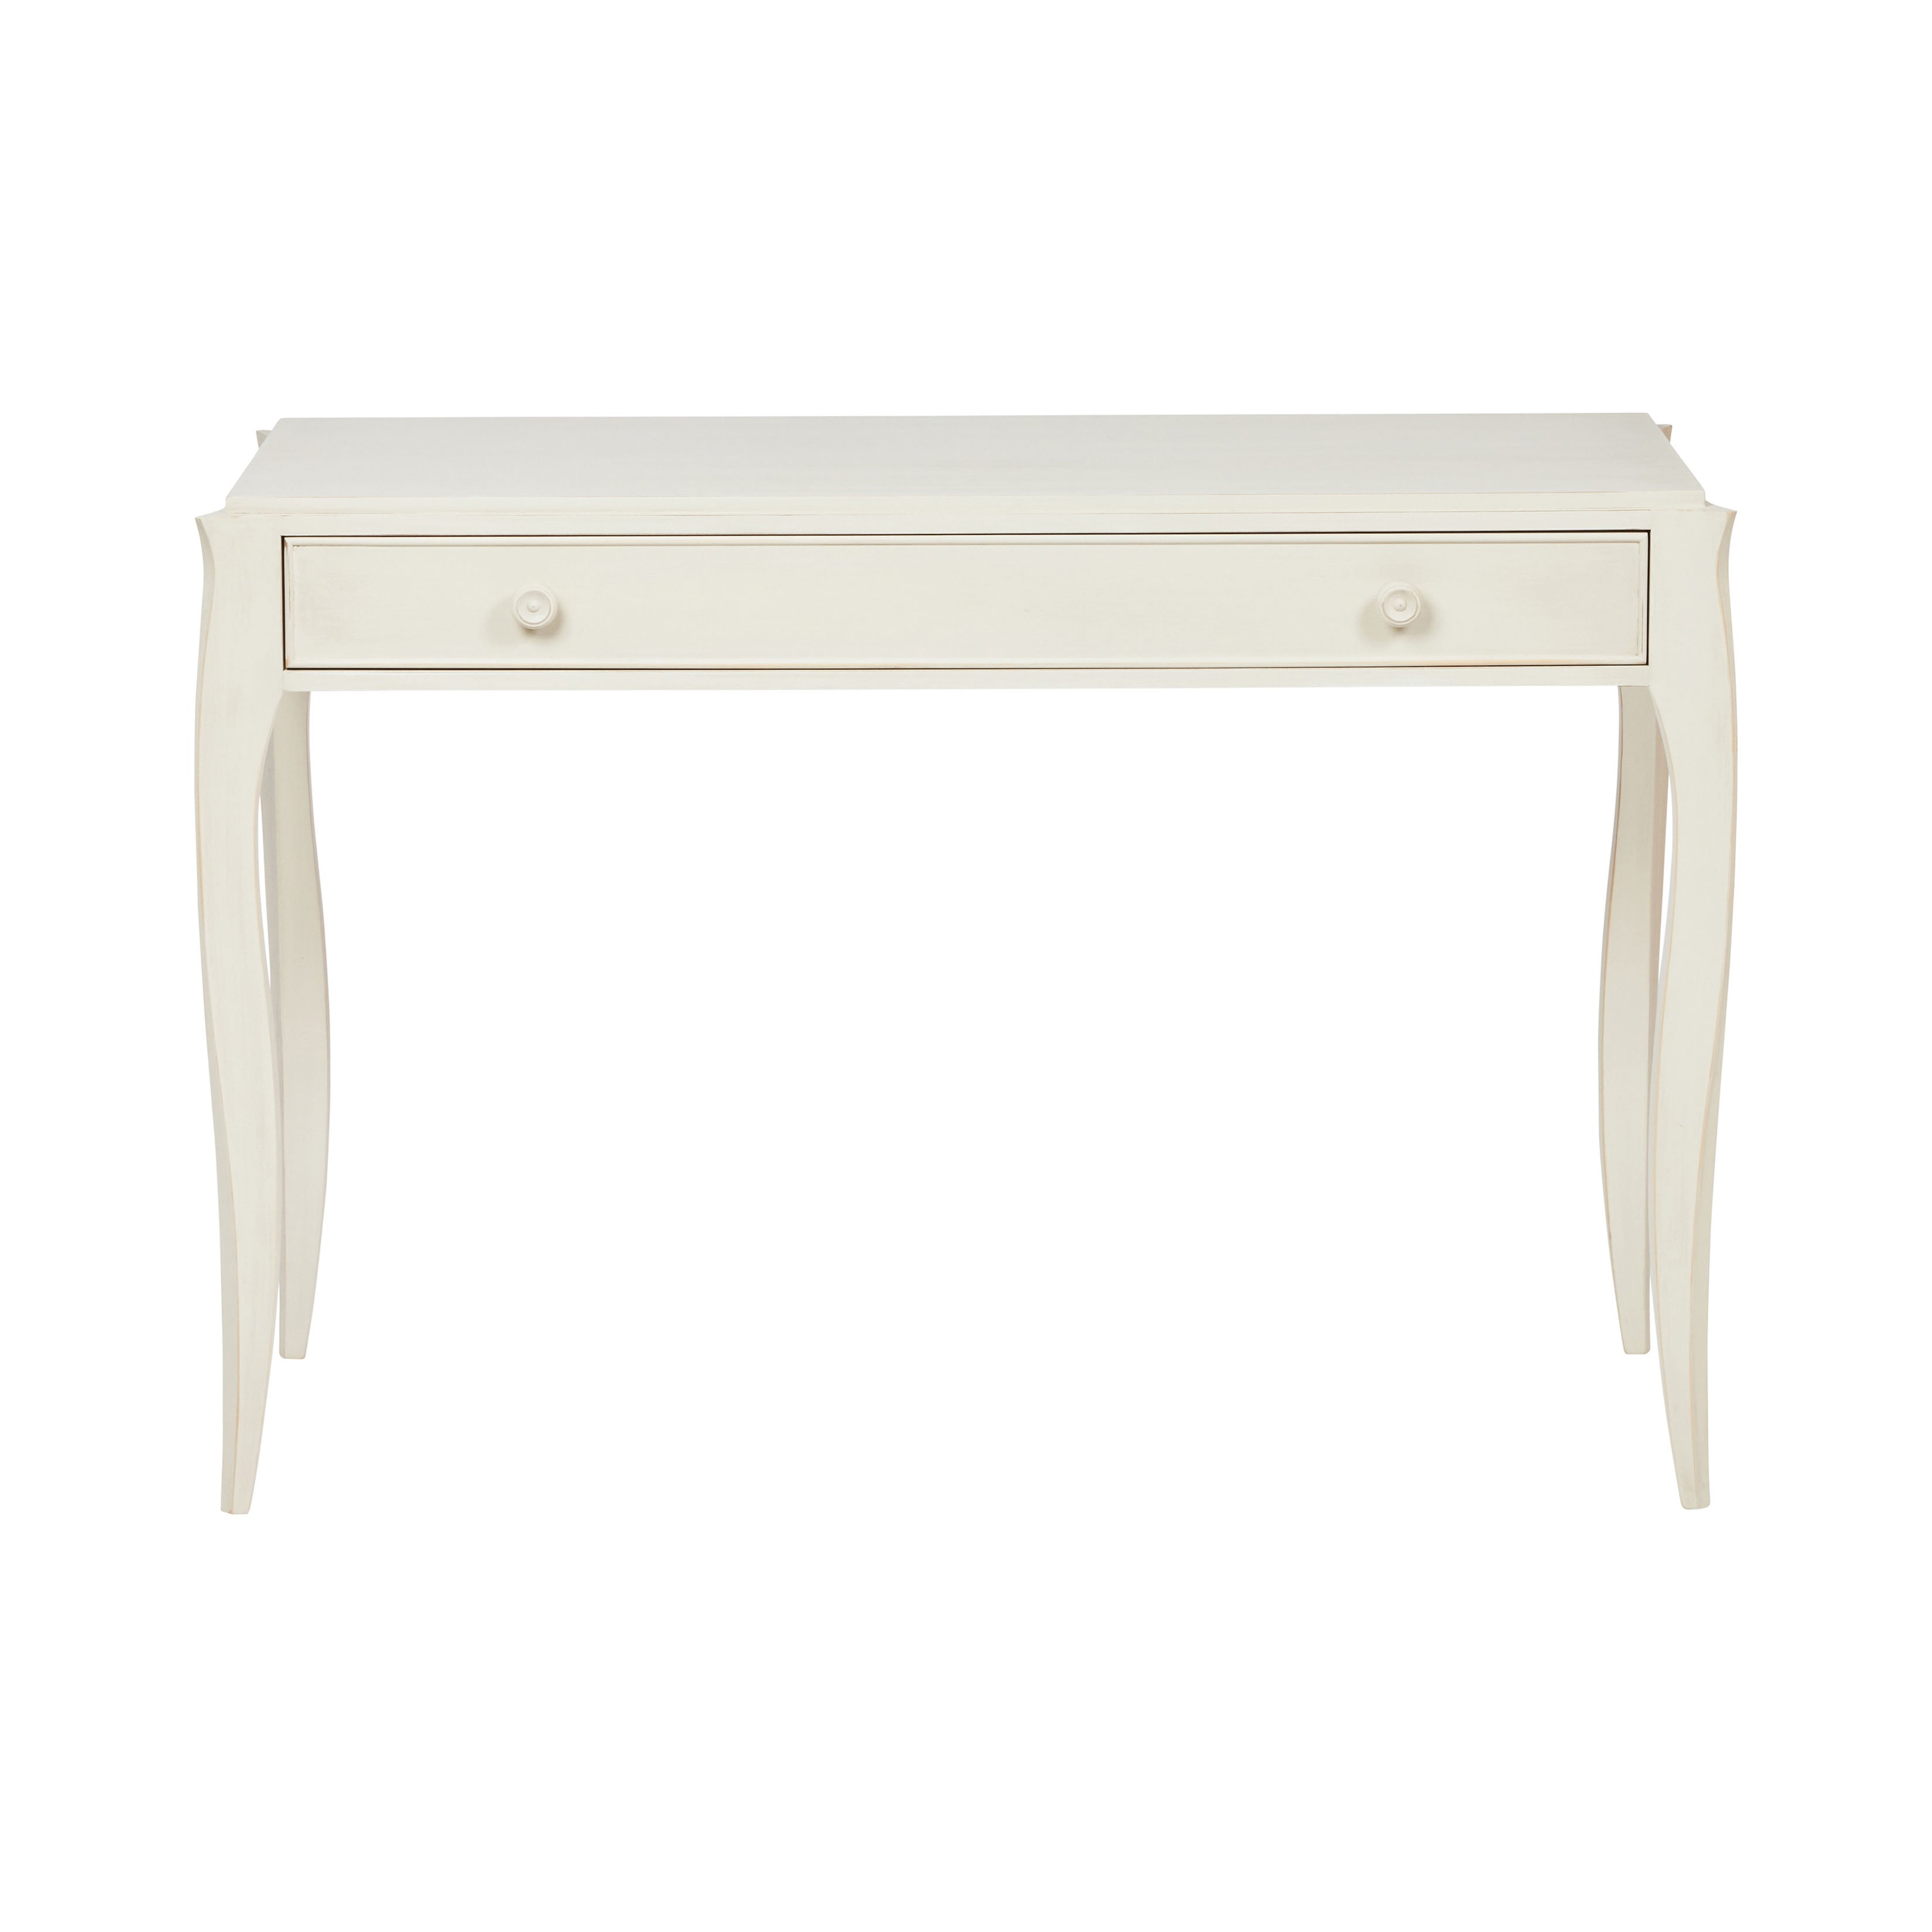 Nina Campbell Margot Writing Table in Mineral White